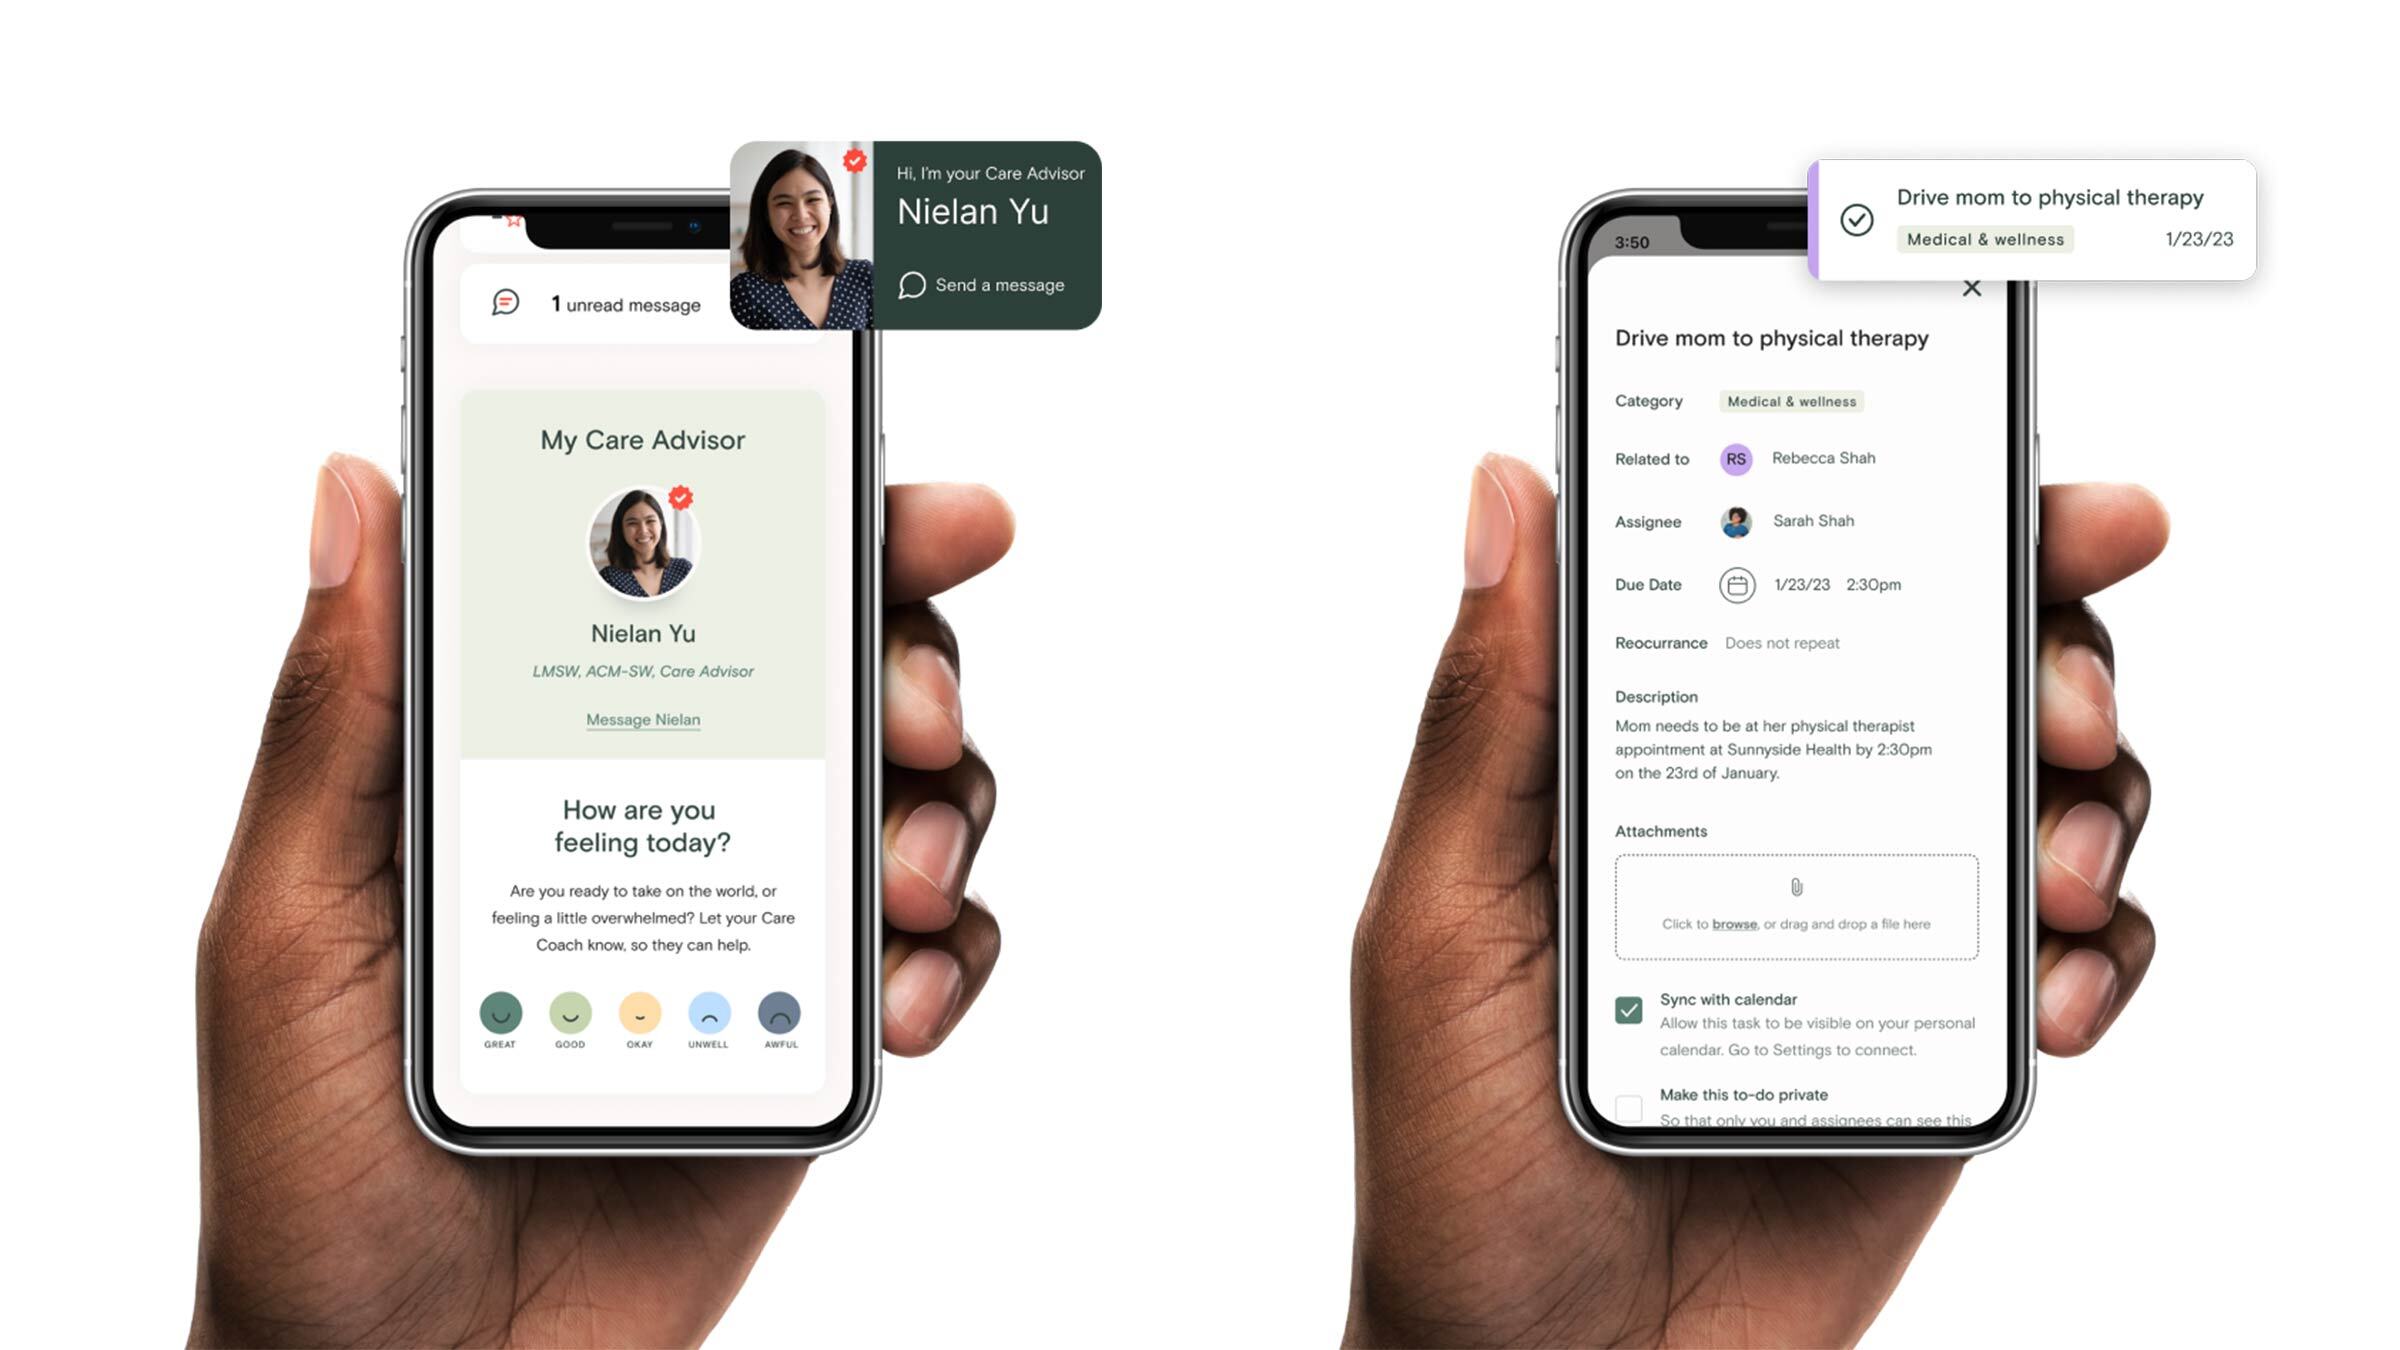 Through CareGo, licensed and certified Care Advisors are here to offer personalized support and guidance. The platform’s digital tools help caregivers plan and stay organized, providing a centralized communication center for the care team and caregiver.